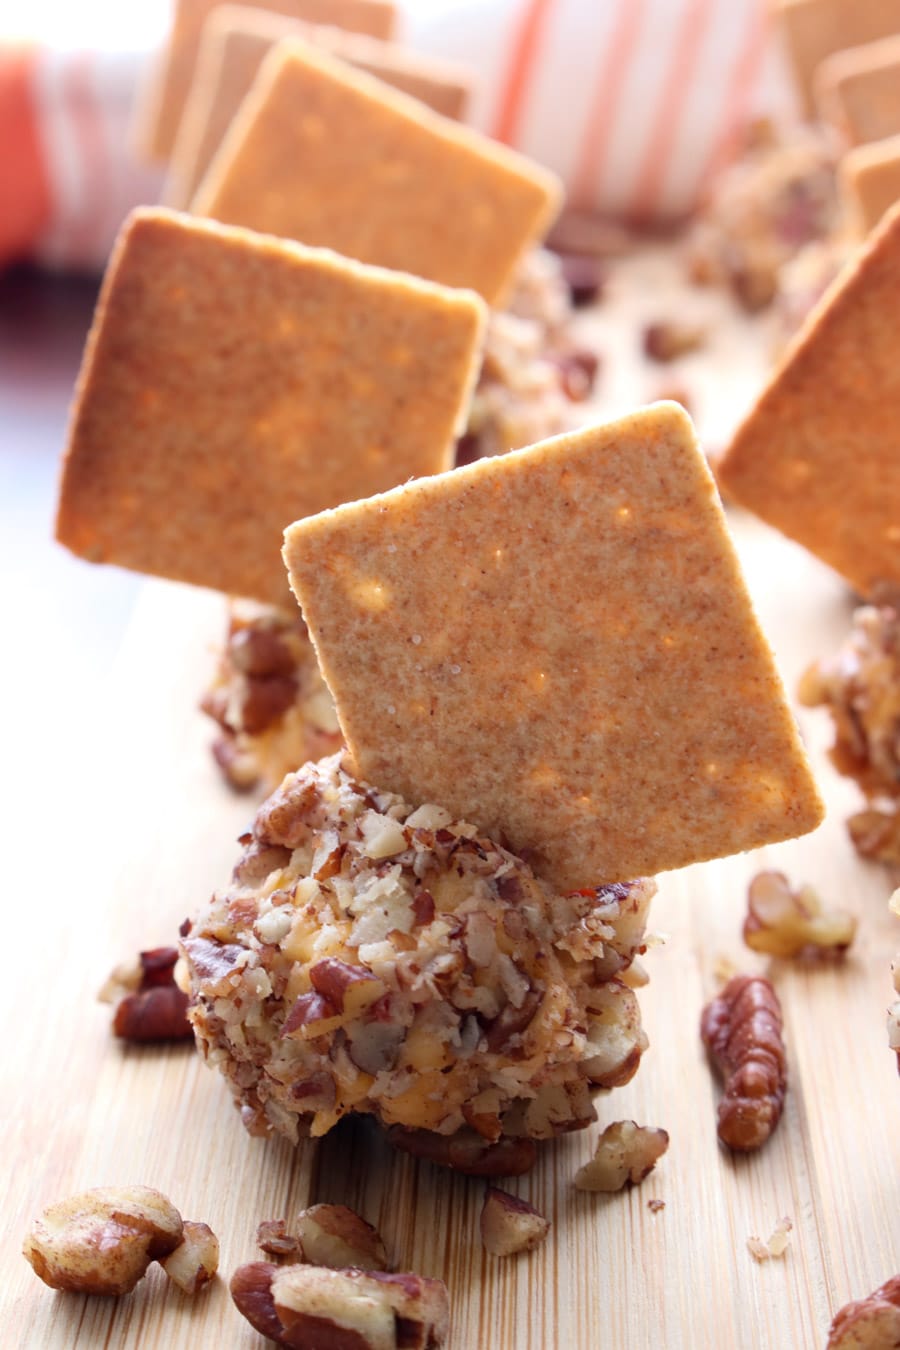 Pimento Cheese ball coated in nuts with a cracker stuck in it